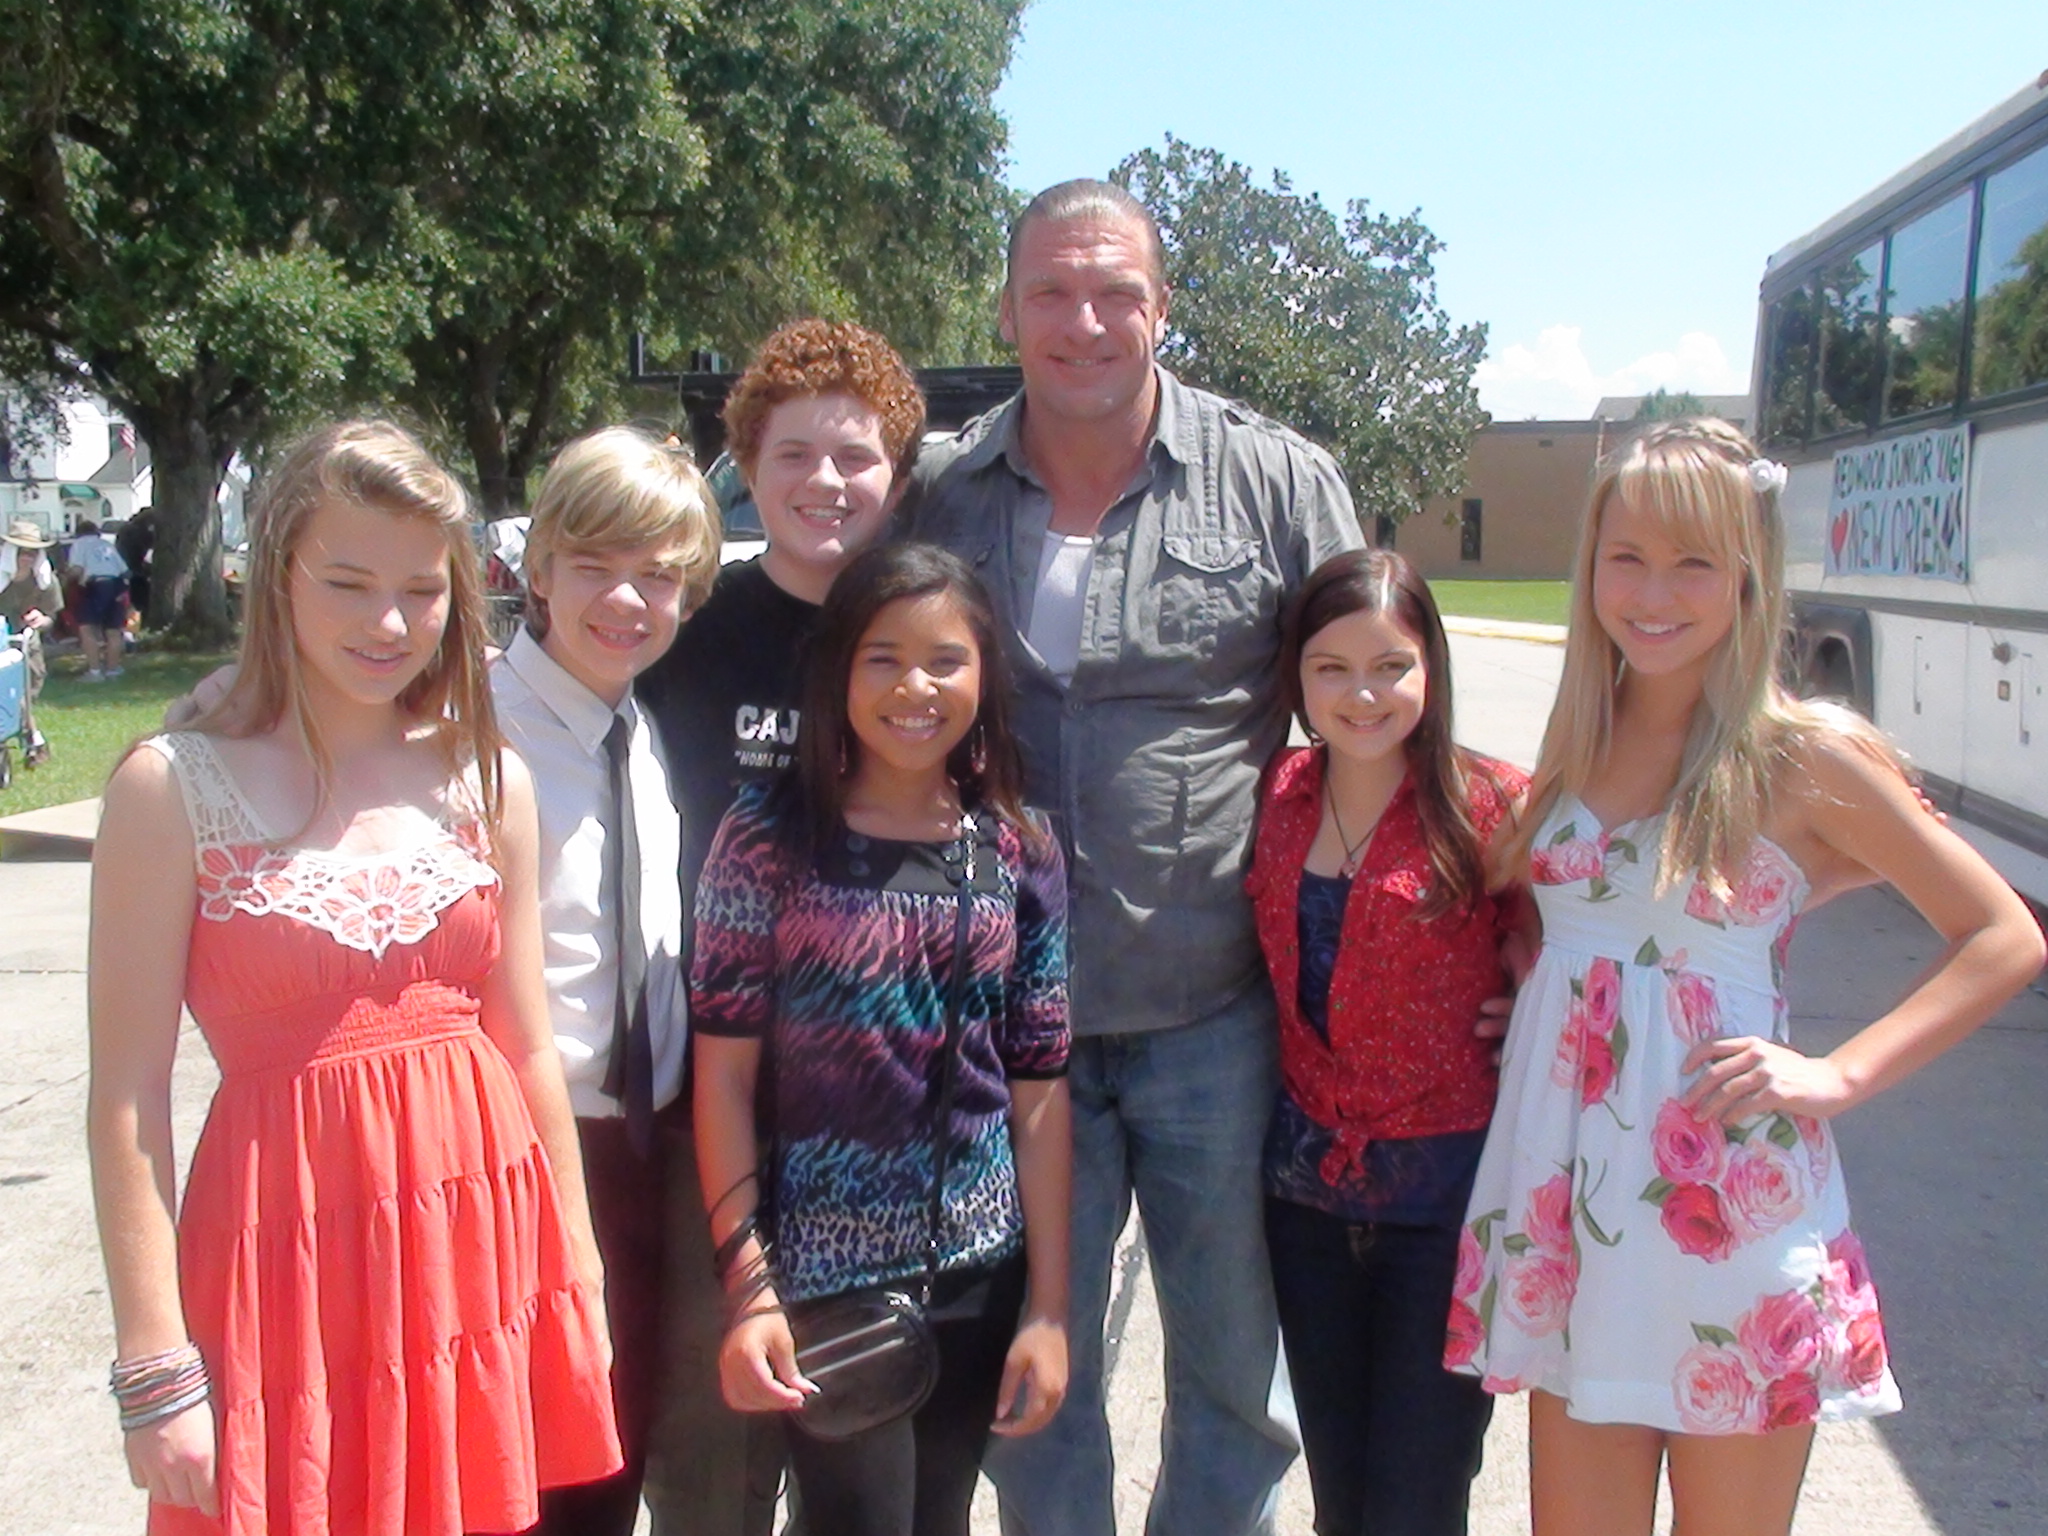 Taylor Faye Ruffin with castmates on the set of The Chaperone 6/2010. What Great Fun!!!! :)